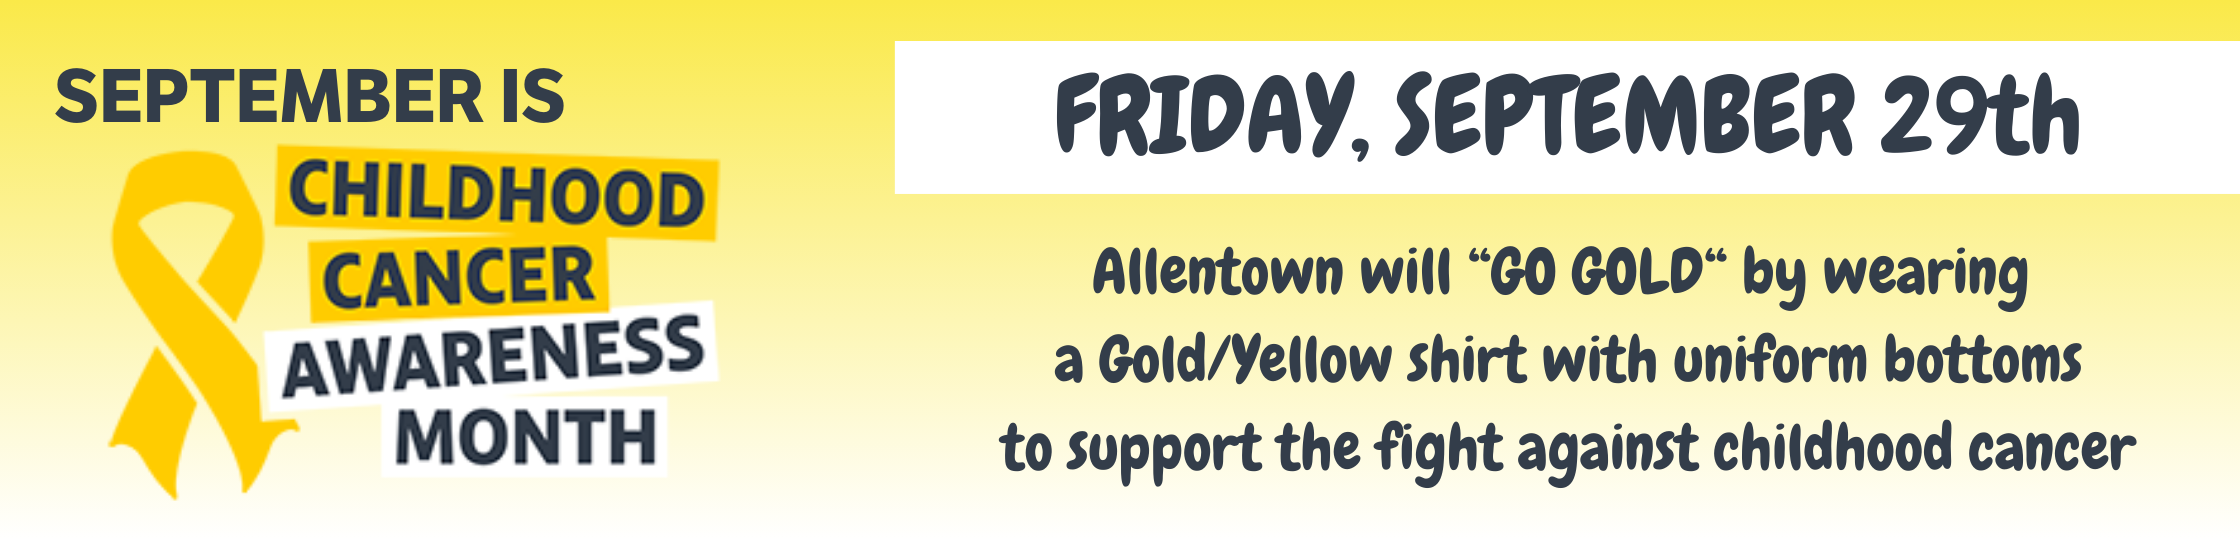 September 29th wear gold/yellow shirts to go gold